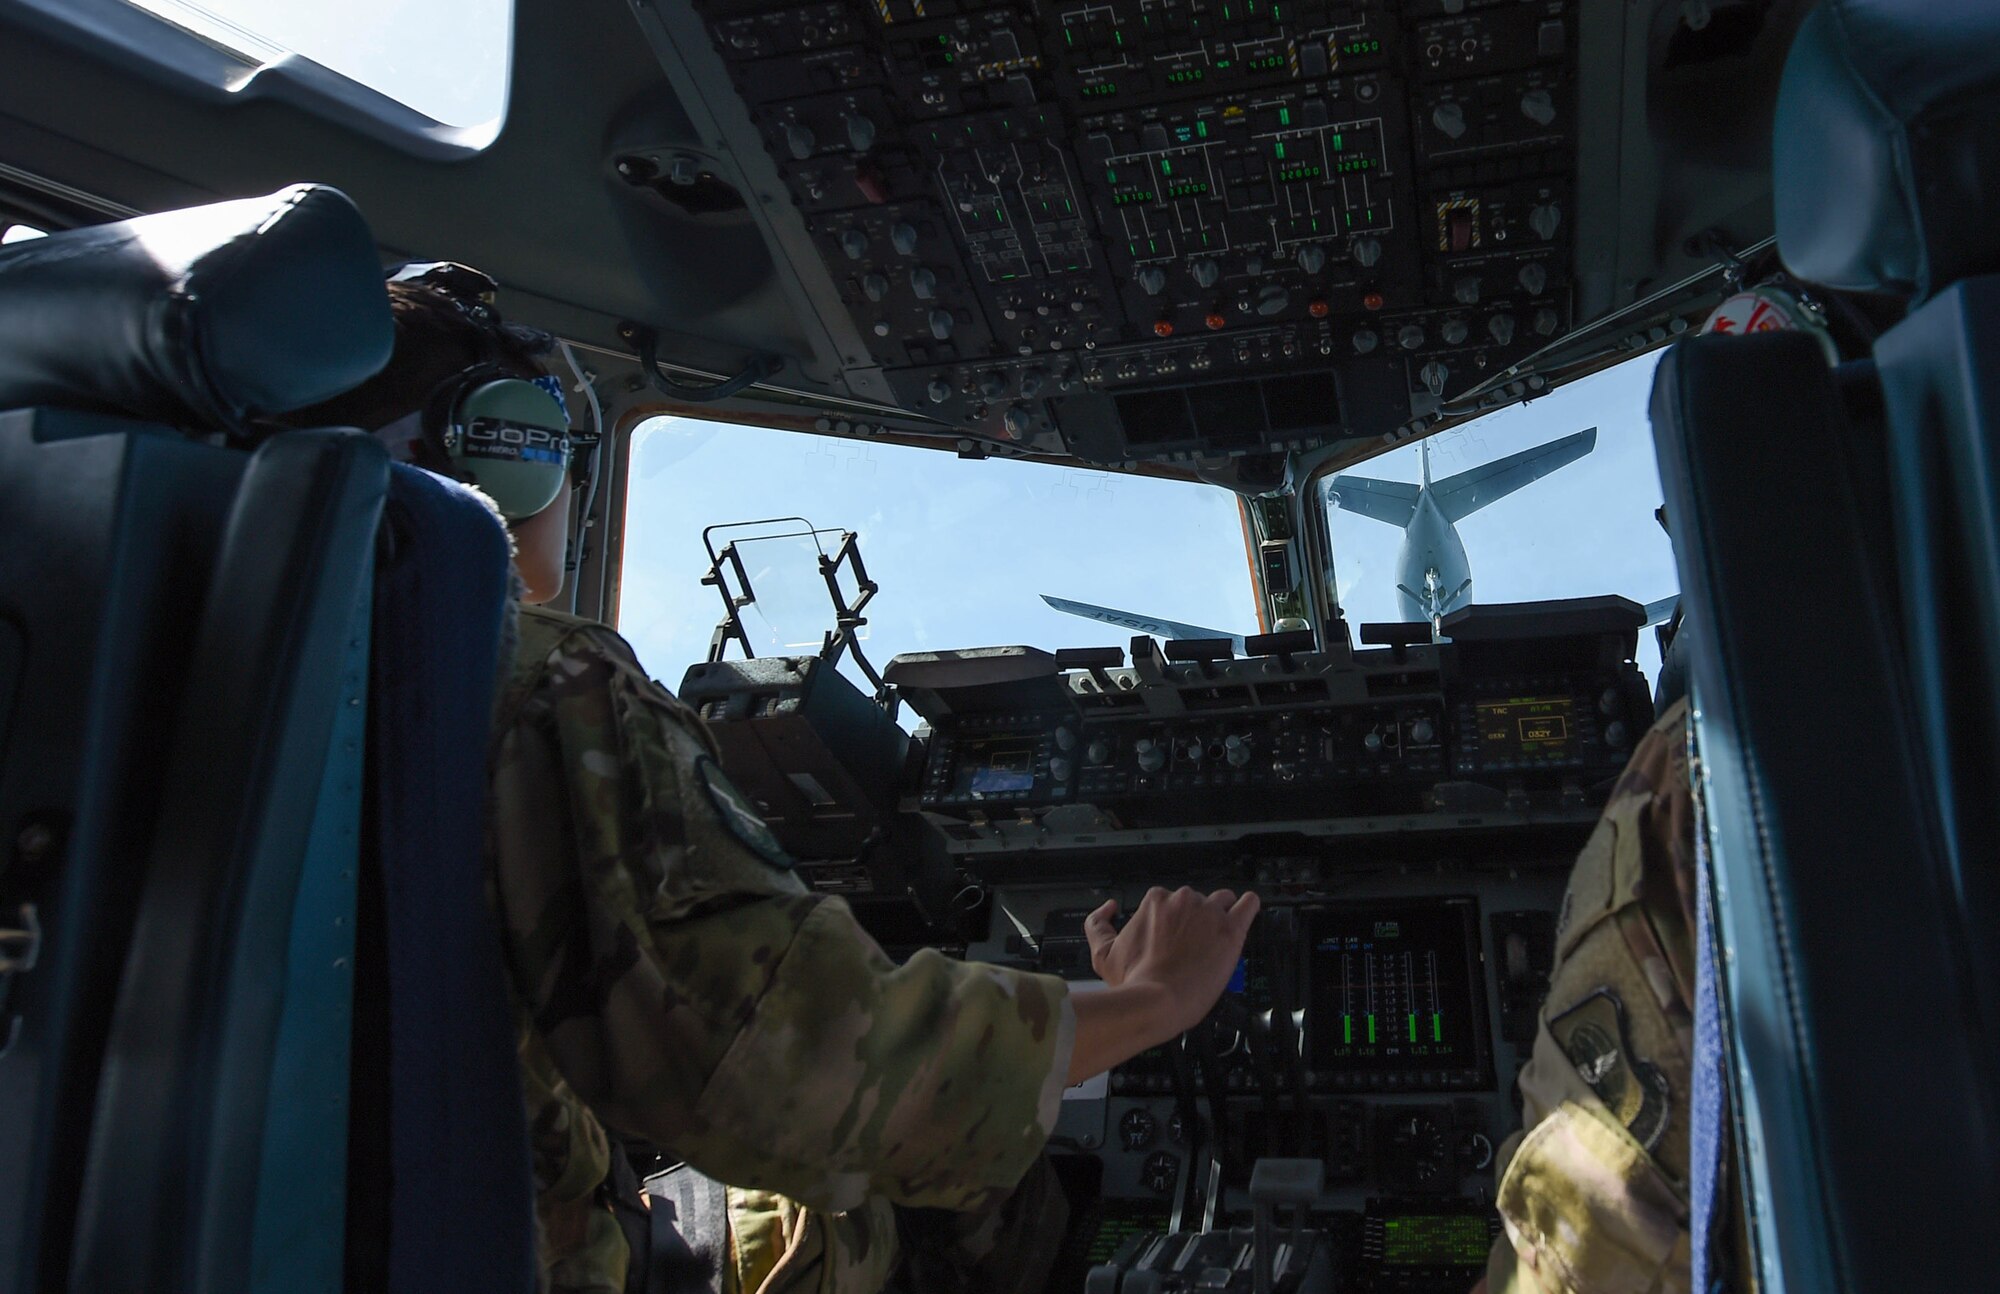 Capt. Tate Montgomery, 7th Airlift Squadron pilot, flies a C-17 Globemaster III towards a KC-135 Stratotanker for refueling during Exercise Rainer War near Moses Lake, Wash., June 6, 2018. Three KC-135 Stratotankers participated in Exercise Rainier War to provide in-air refueling to the multiple C-17s executing tactical combat missions. (U.S. Air Force photo by Senior Airman Tryphena Mayhugh)